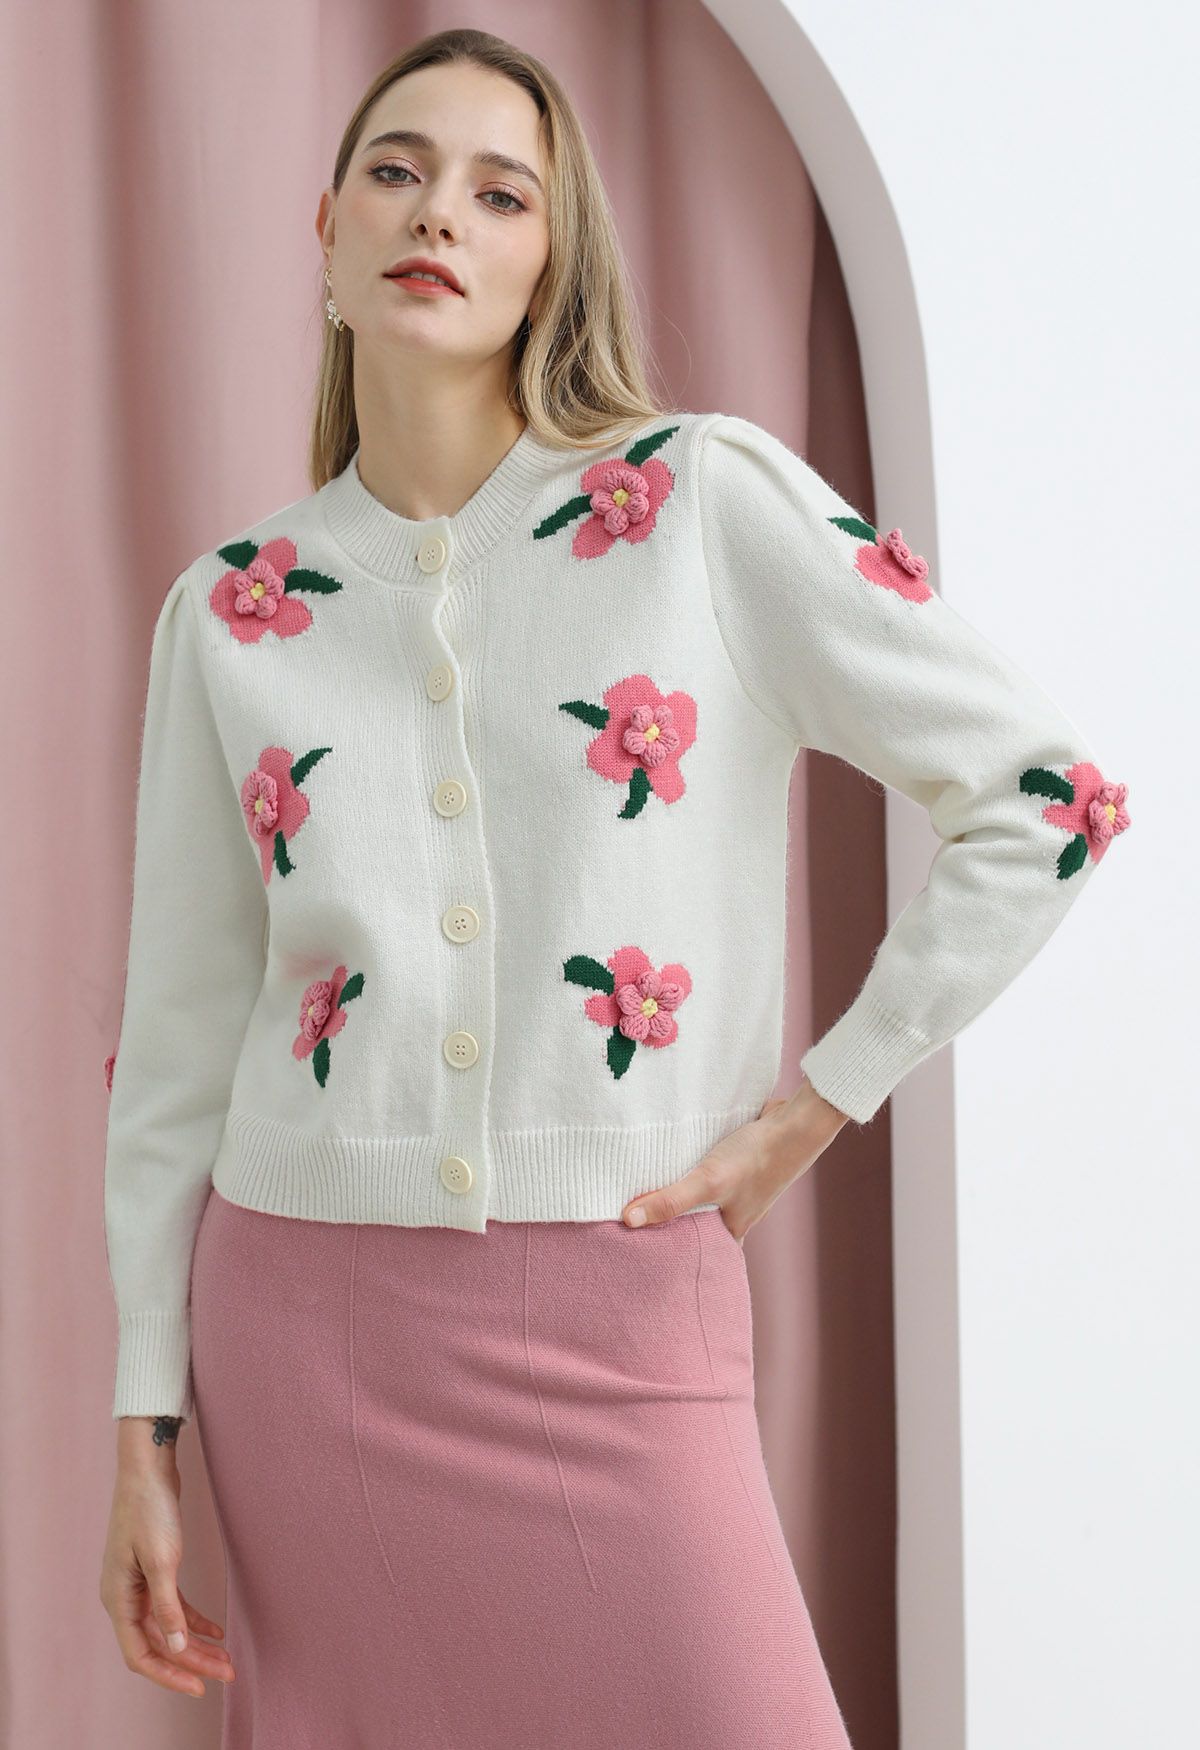 3D Stitch Flower Embroidered Button Down Cardigan in White